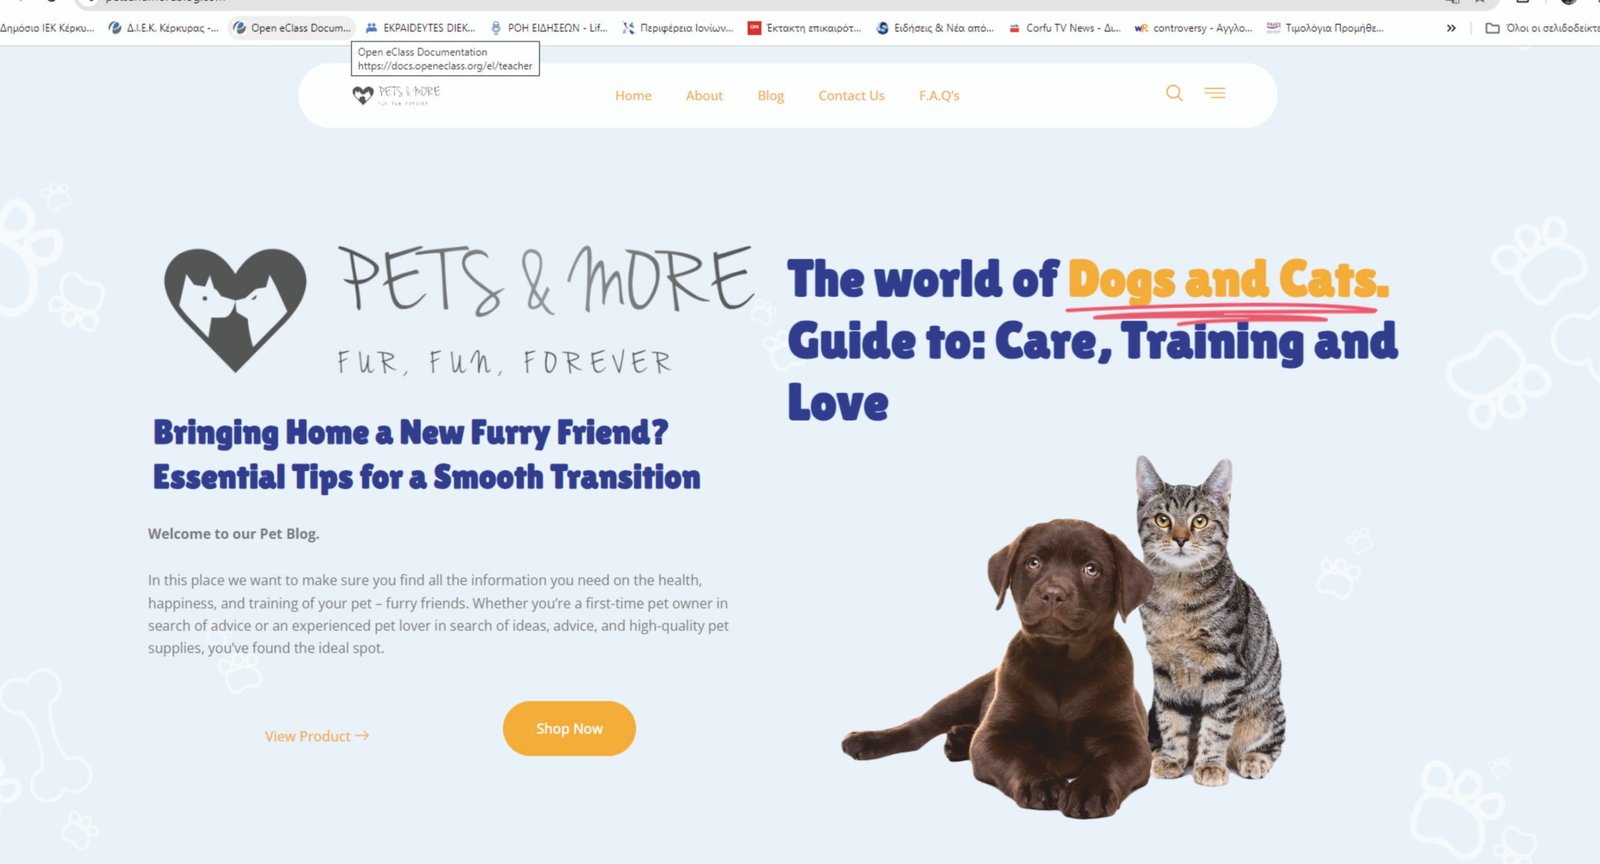 Pets and more is a blog mainly about dogs and other home pets